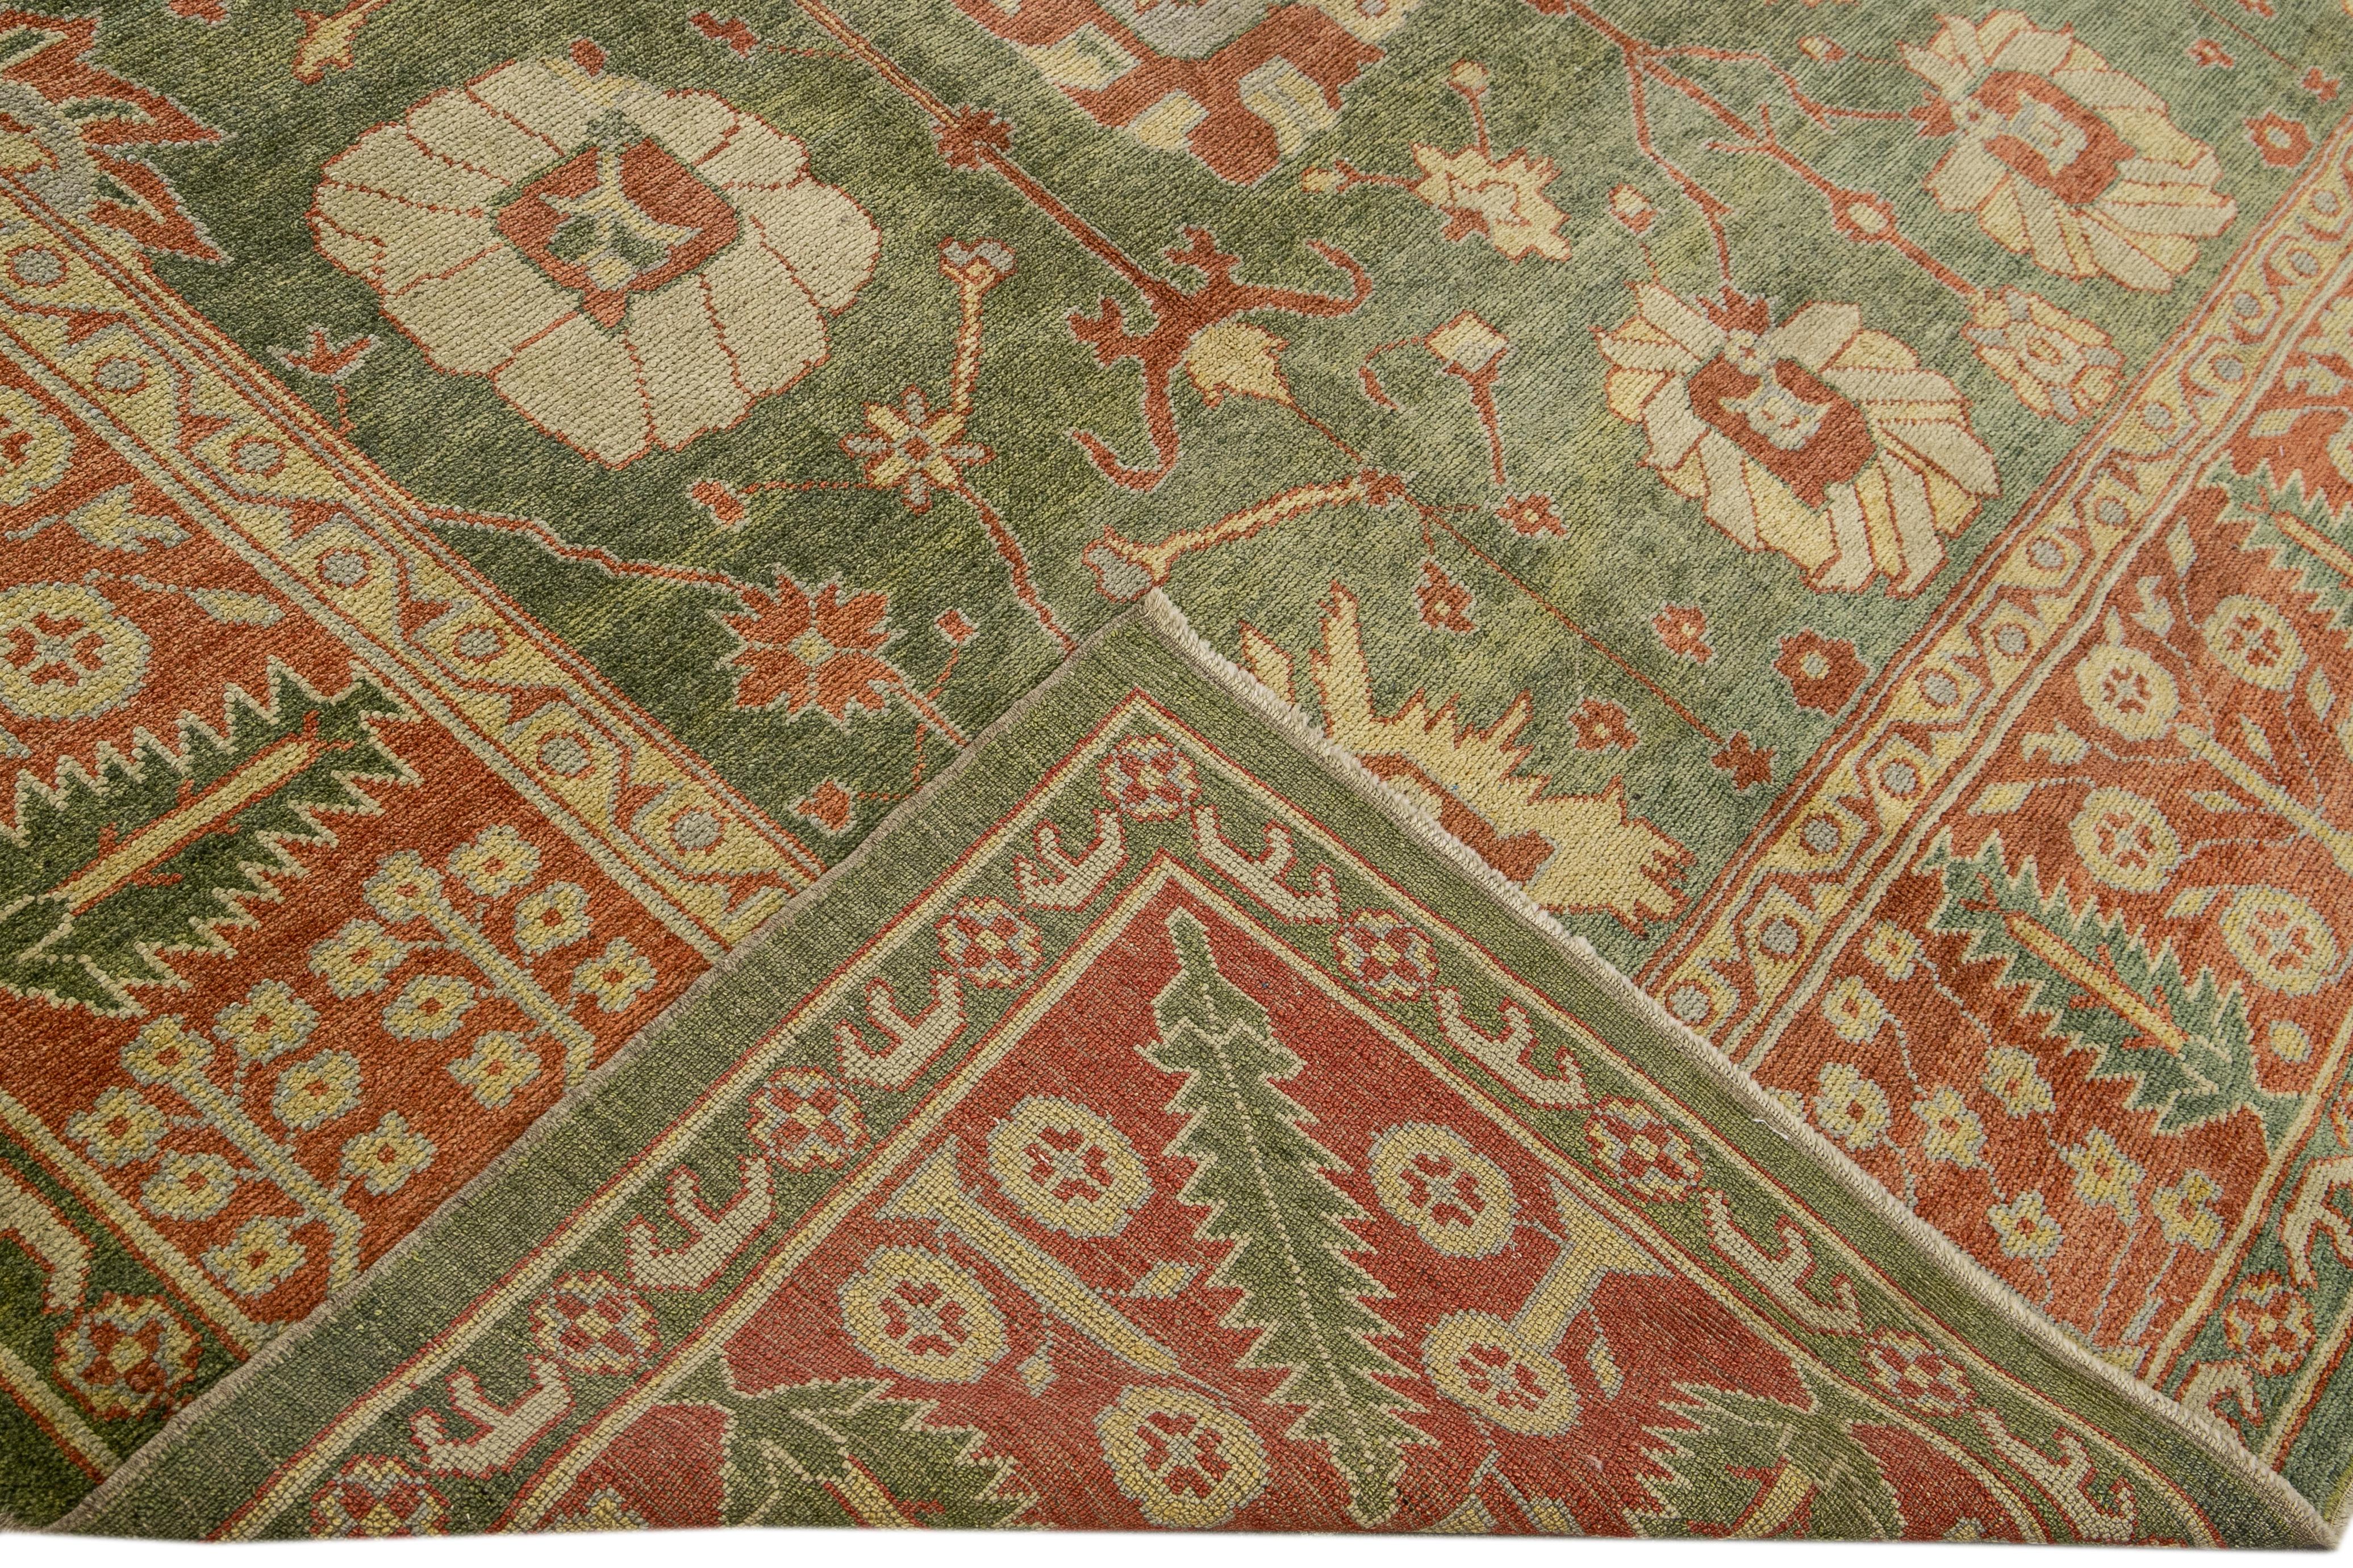 Beautiful modern Oushak hand-knotted wool rug with a green field. This Oushak rug has a brown frame and yellow and gray accents all over a gorgeous geometric floral motif.

This rug measures 9'11